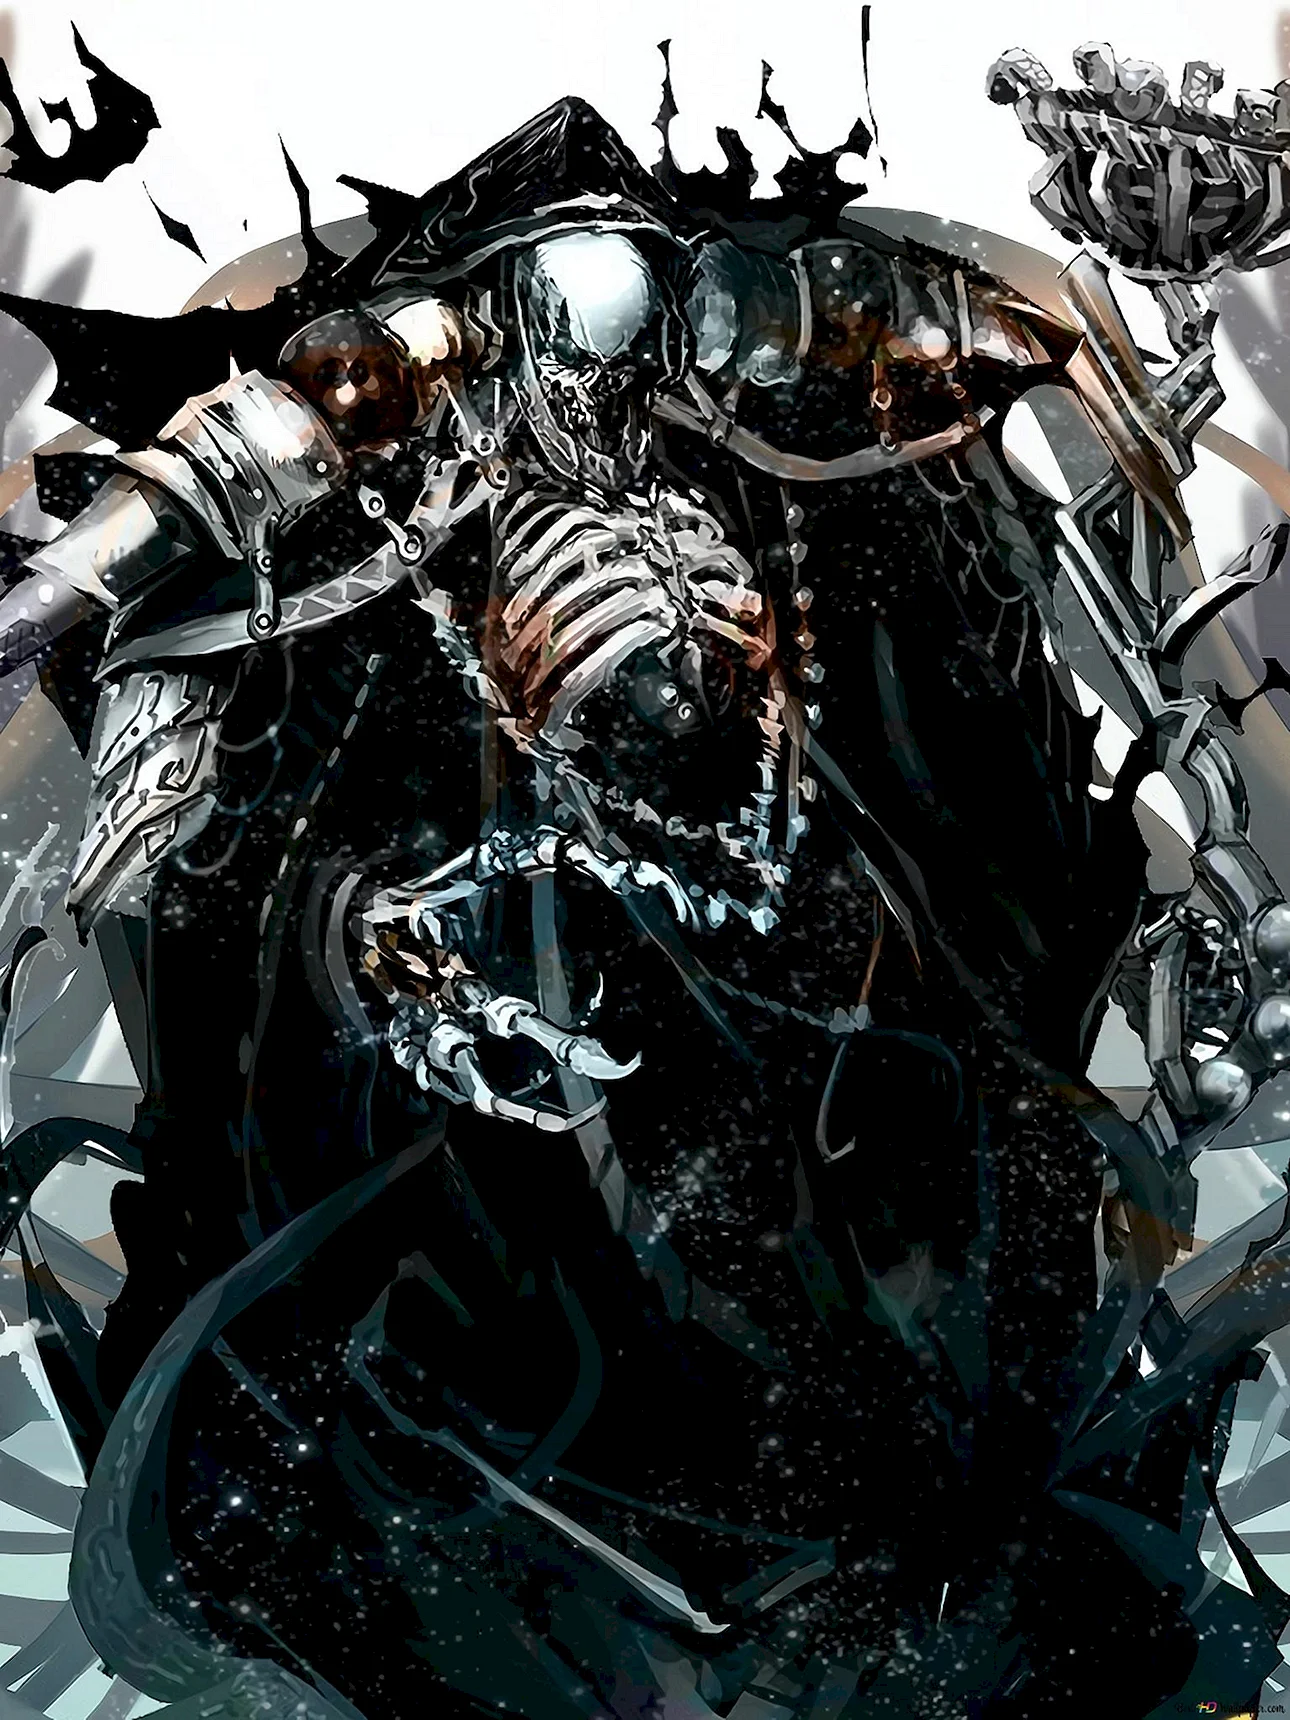 Overlord Anime Wallpaper For iPhone